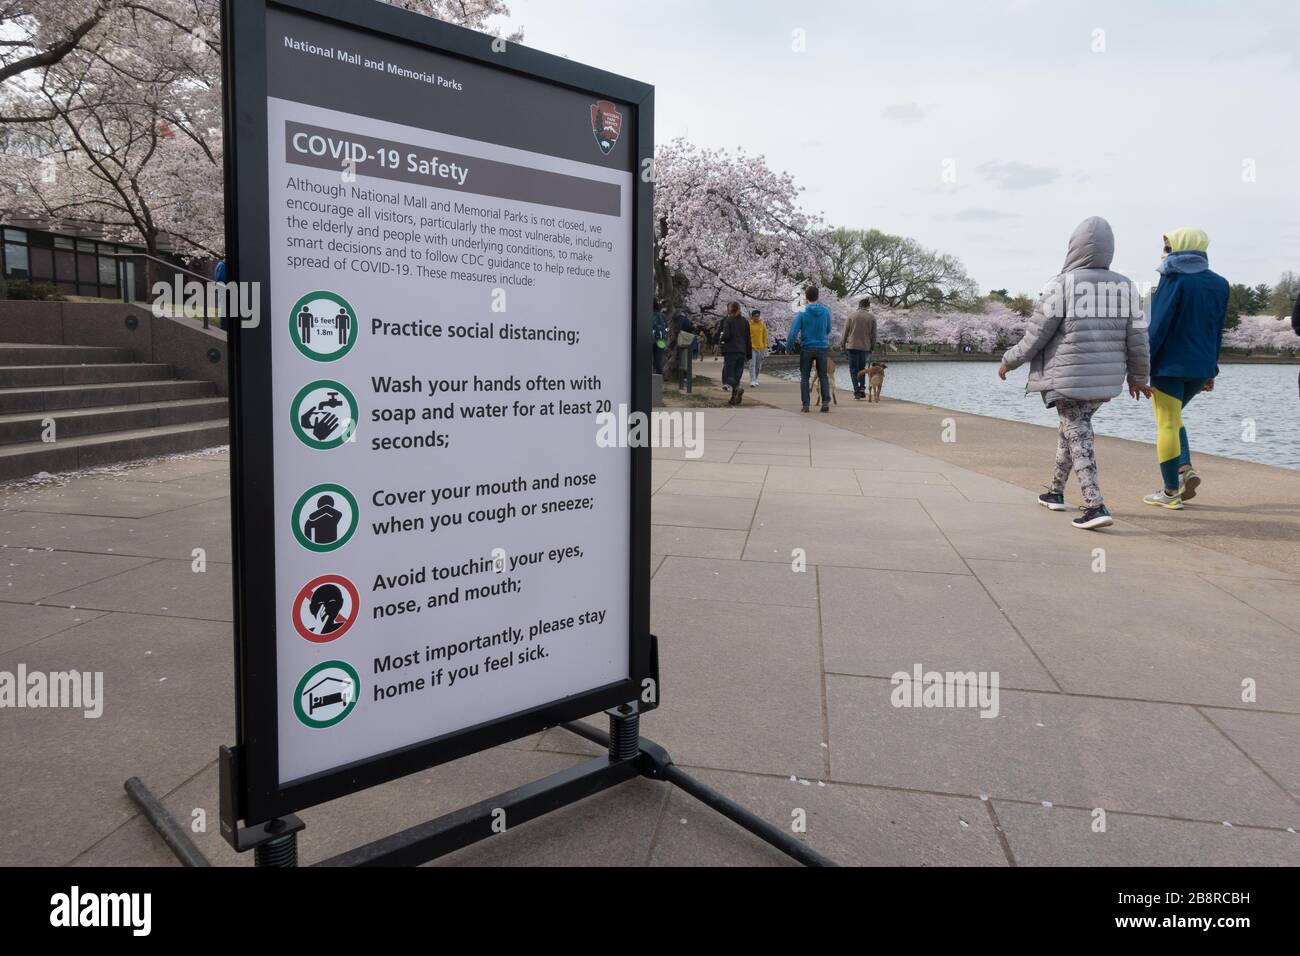 Washington, DC - Mar. 22, 2020: COVID-19 information signs urge safety precautions at the Tidal Basin where residents and tourists normally flock to see the famed cherry blossoms. City officials closed surrounding streets to vehicle traffic, and two Metro stations to minimize the number of visitors and possible contagion. Stock Photo